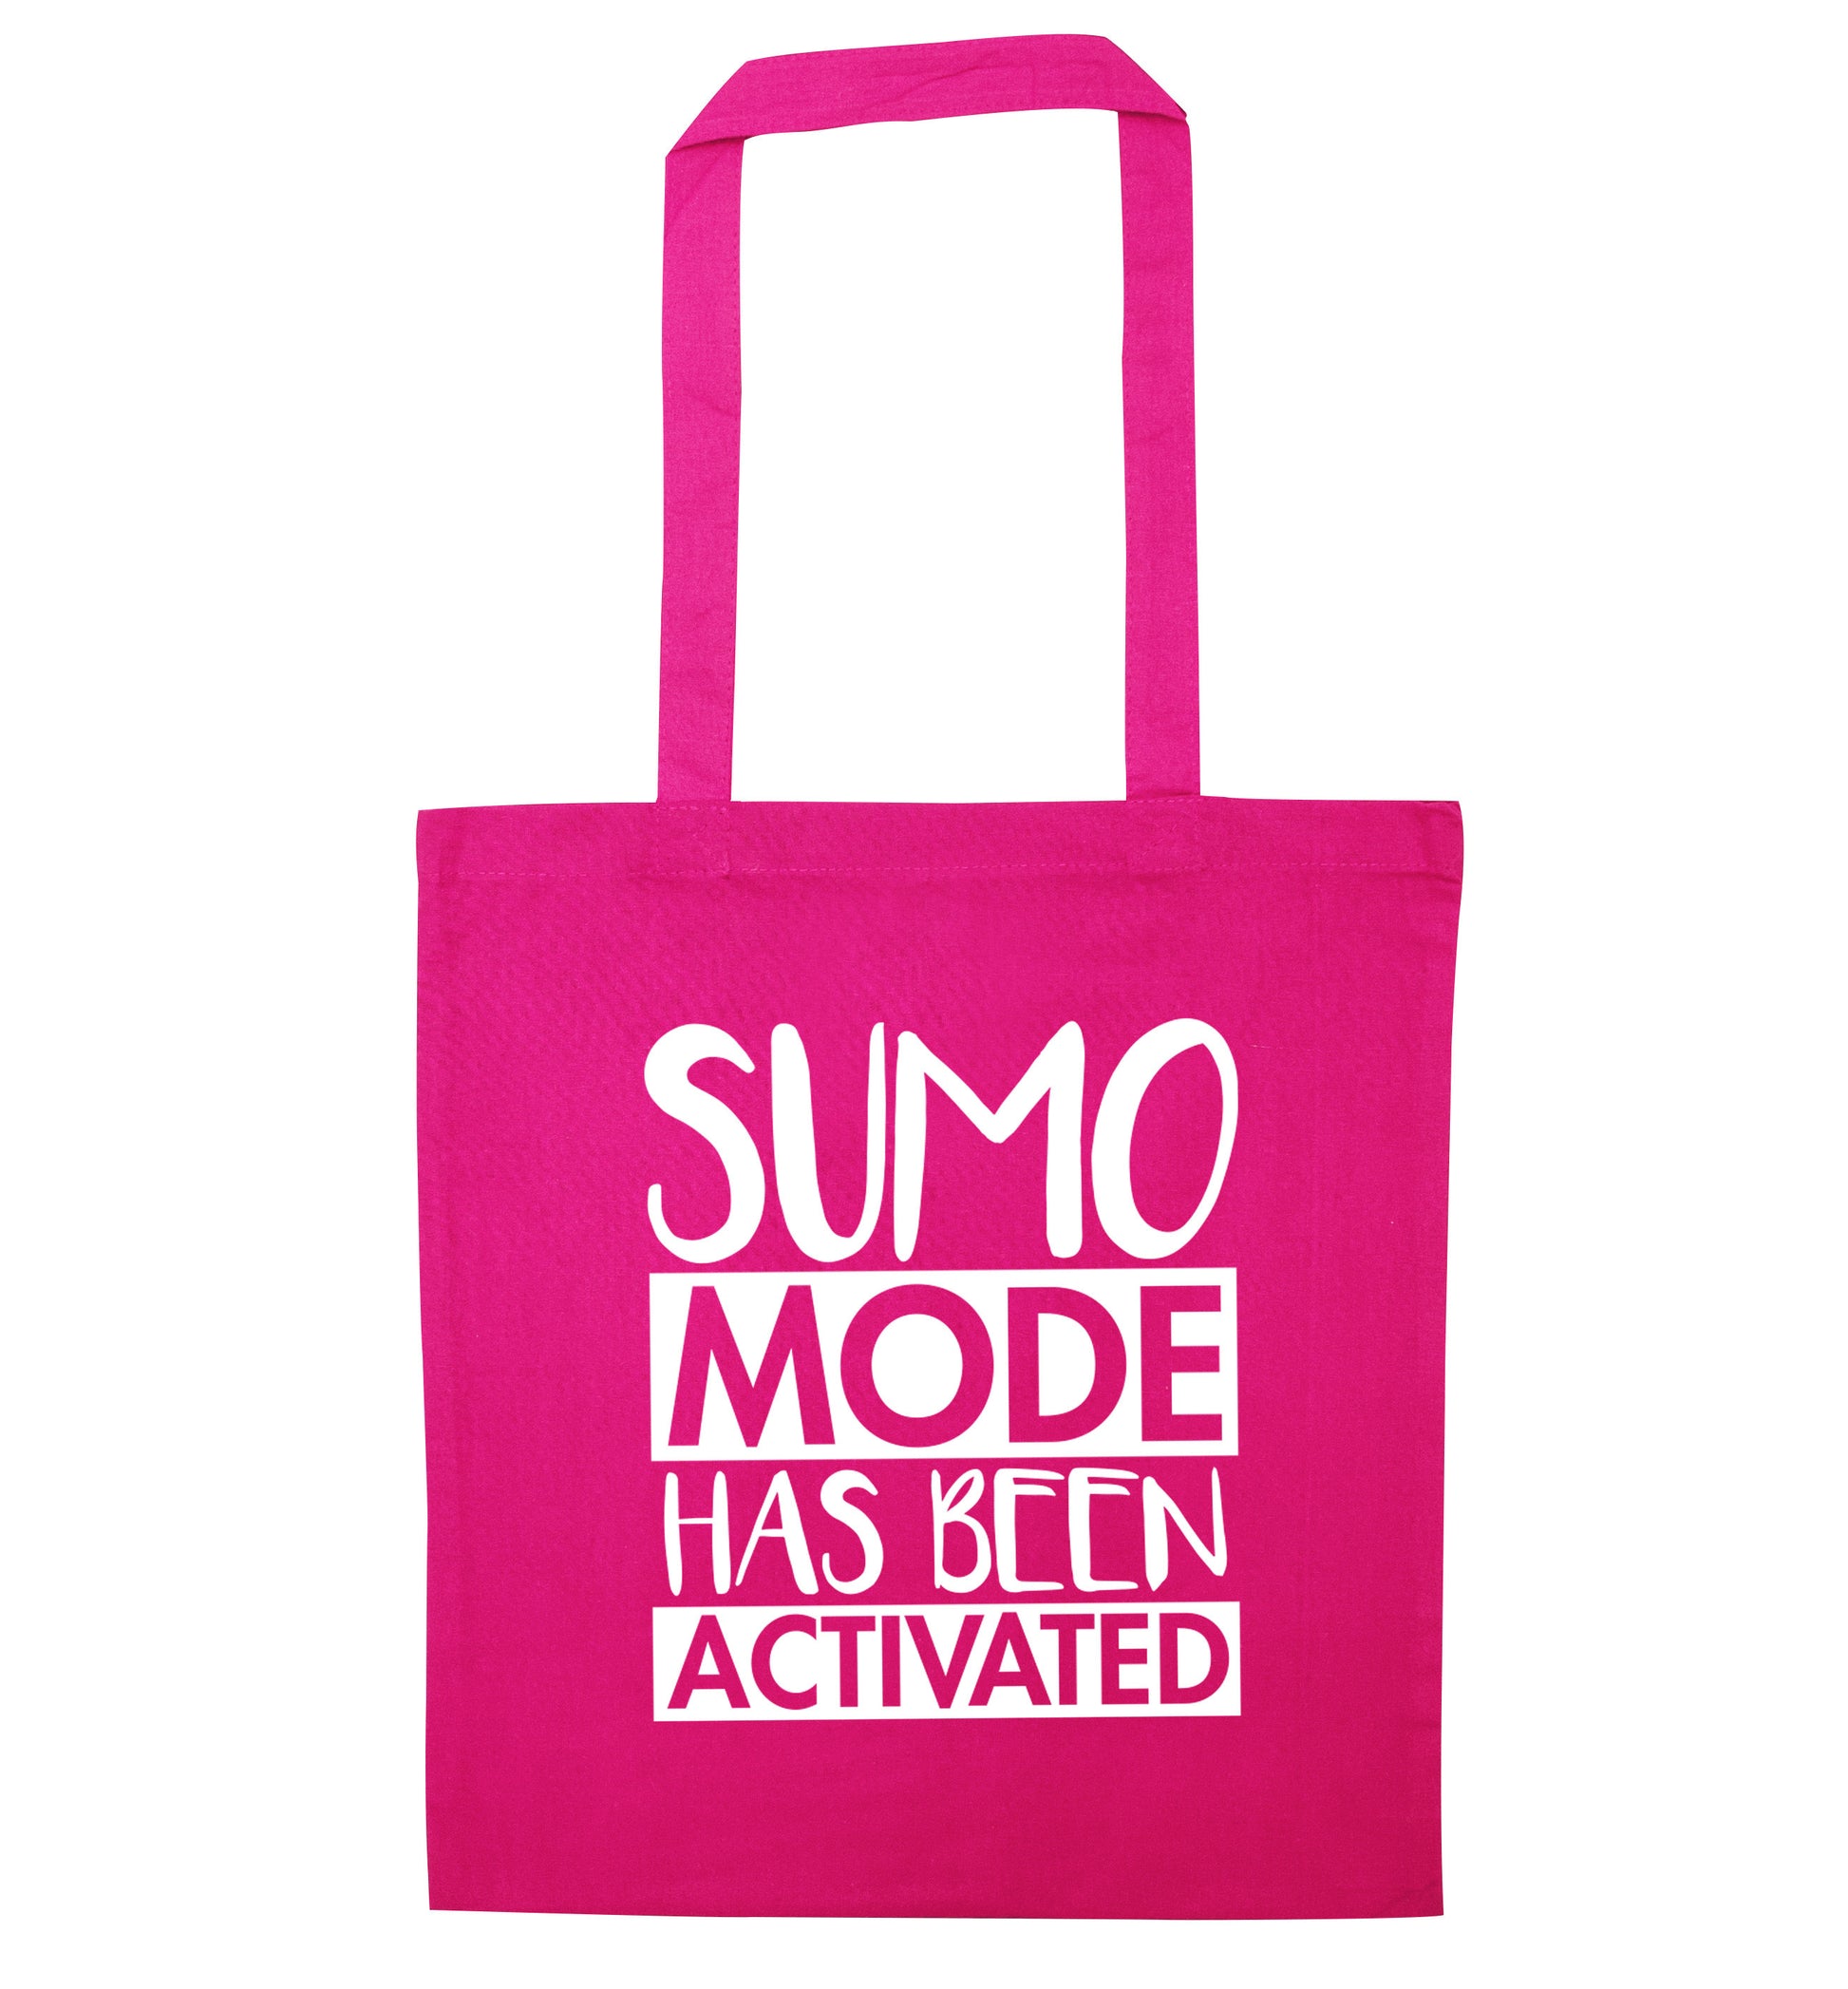 Sumo mode activated pink tote bag